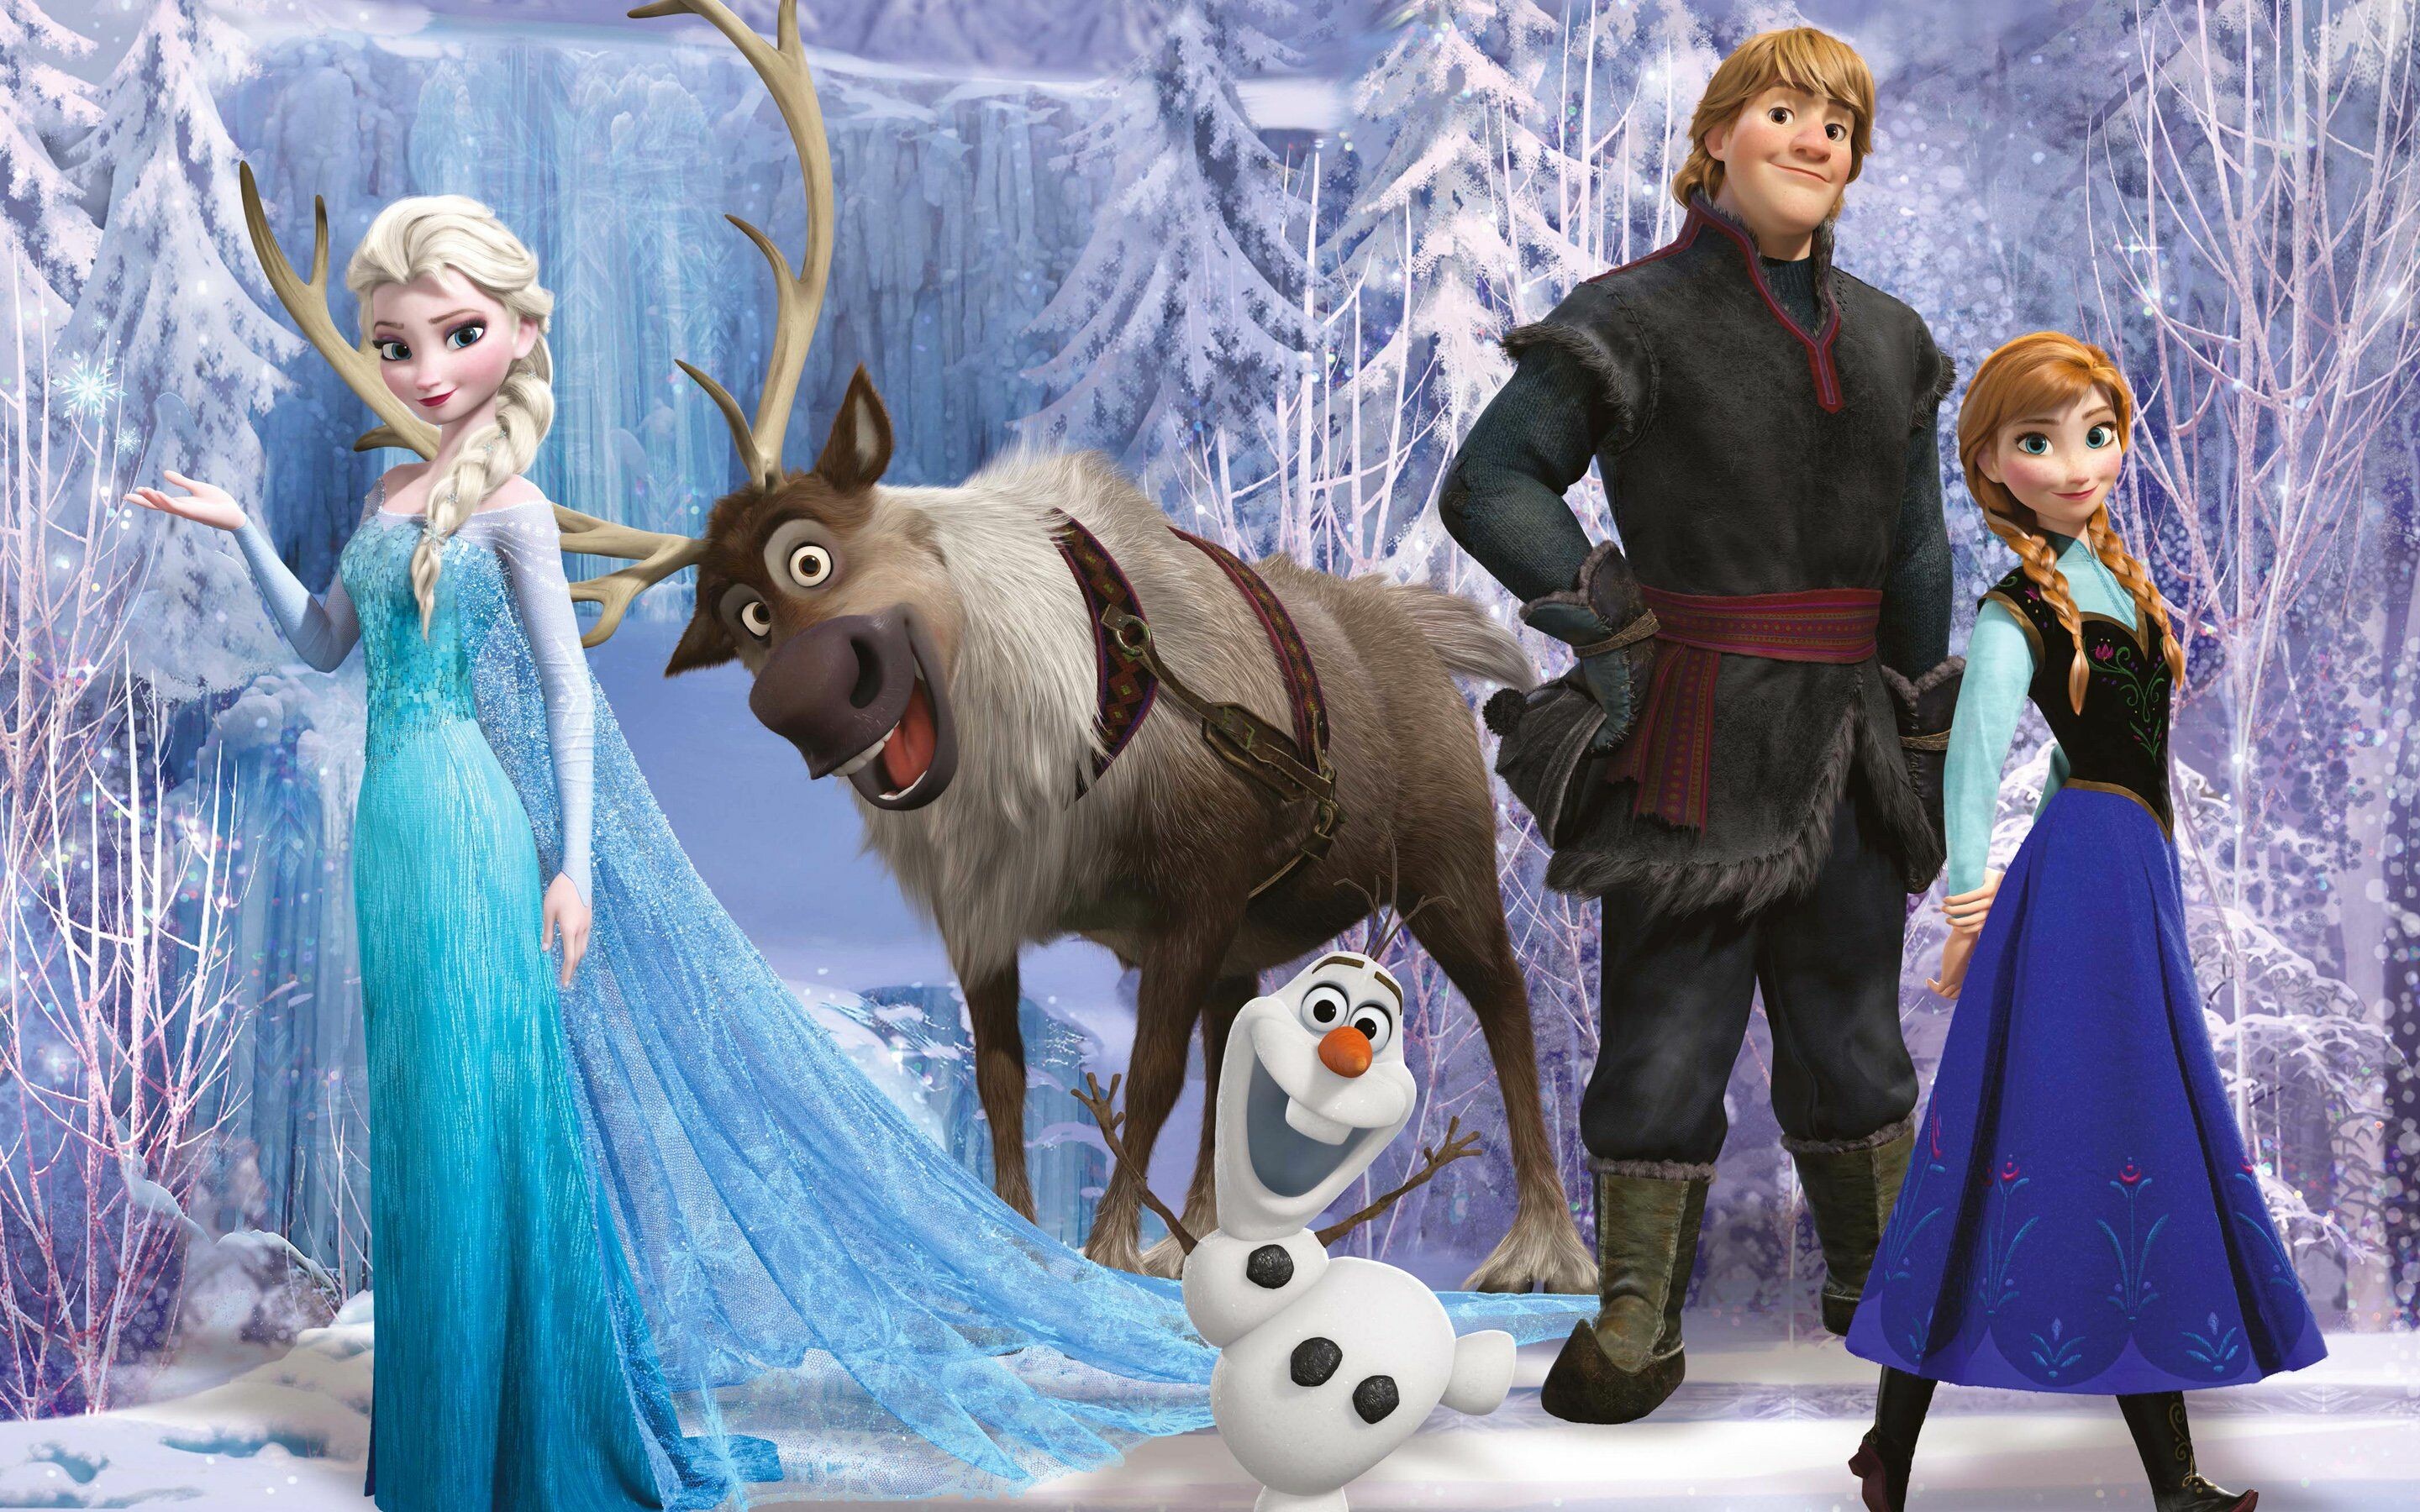 Frozen: The story of Princess Anna as she teams up with an iceman, his reindeer, and a snowman to find her estranged sister Elsa, whose icy powers have inadvertently trapped their kingdom in eternal winter. 2880x1800 HD Wallpaper.